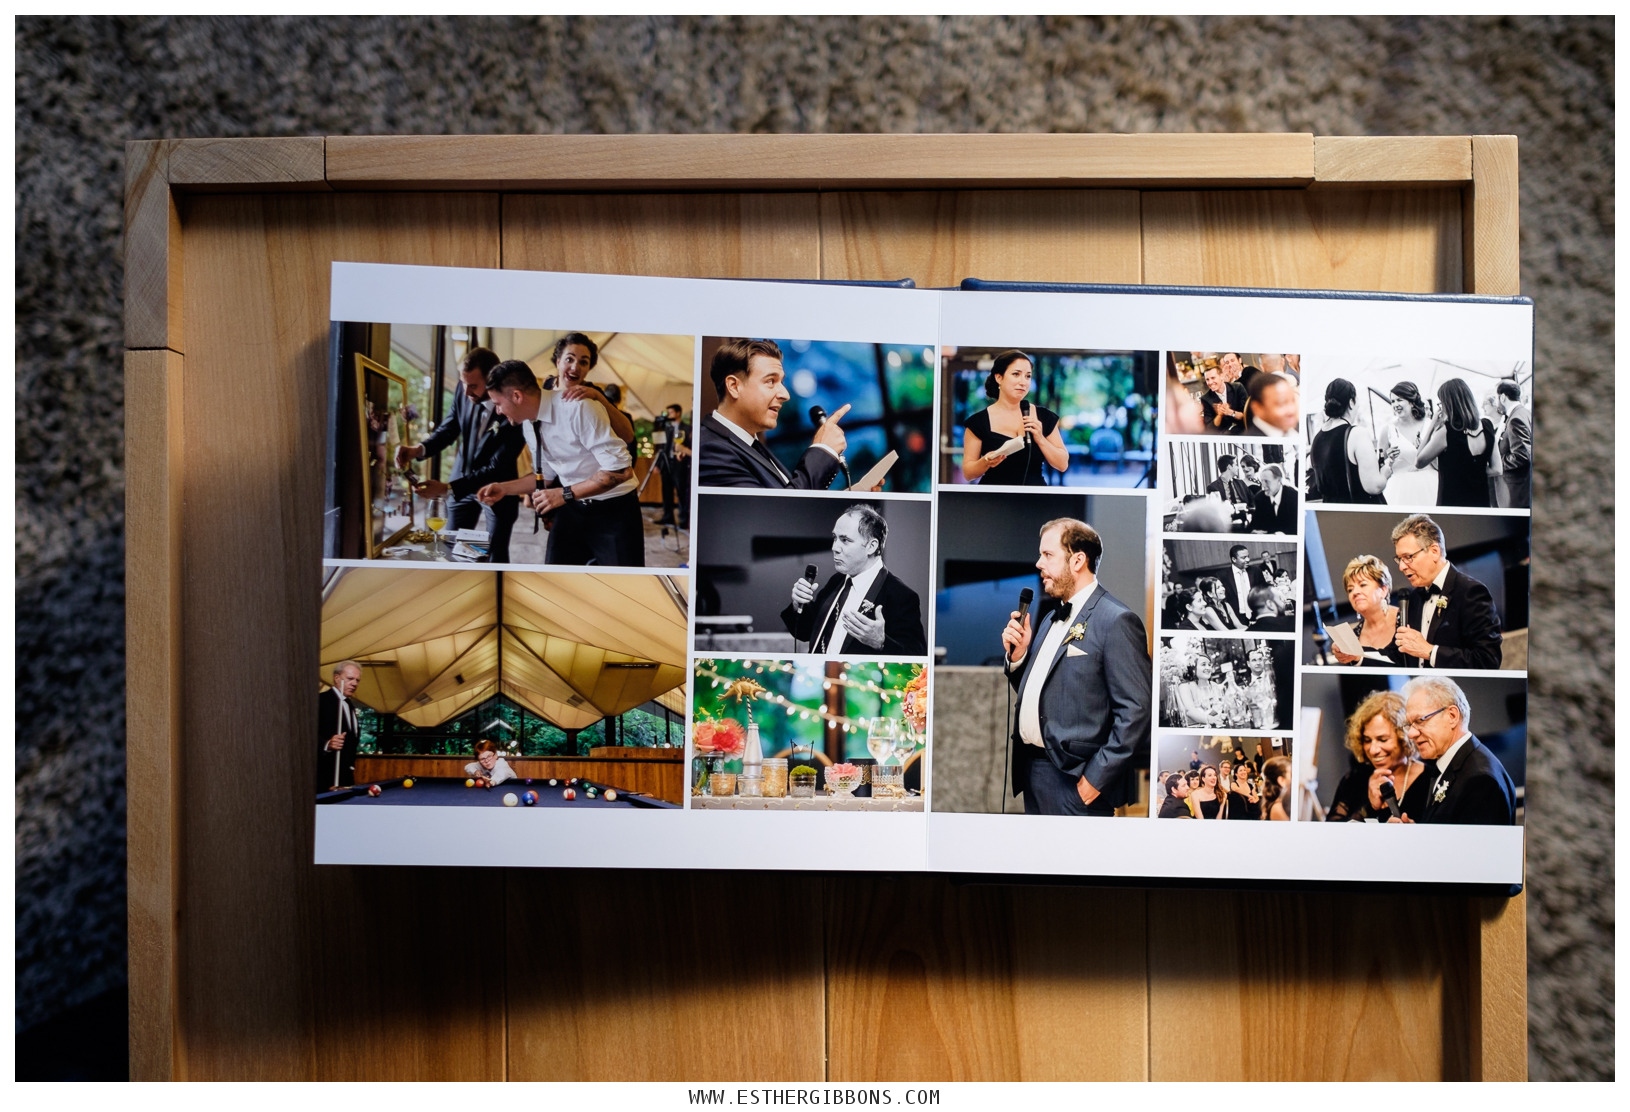 A busier spread design with smaller images, perfect for documenting the party